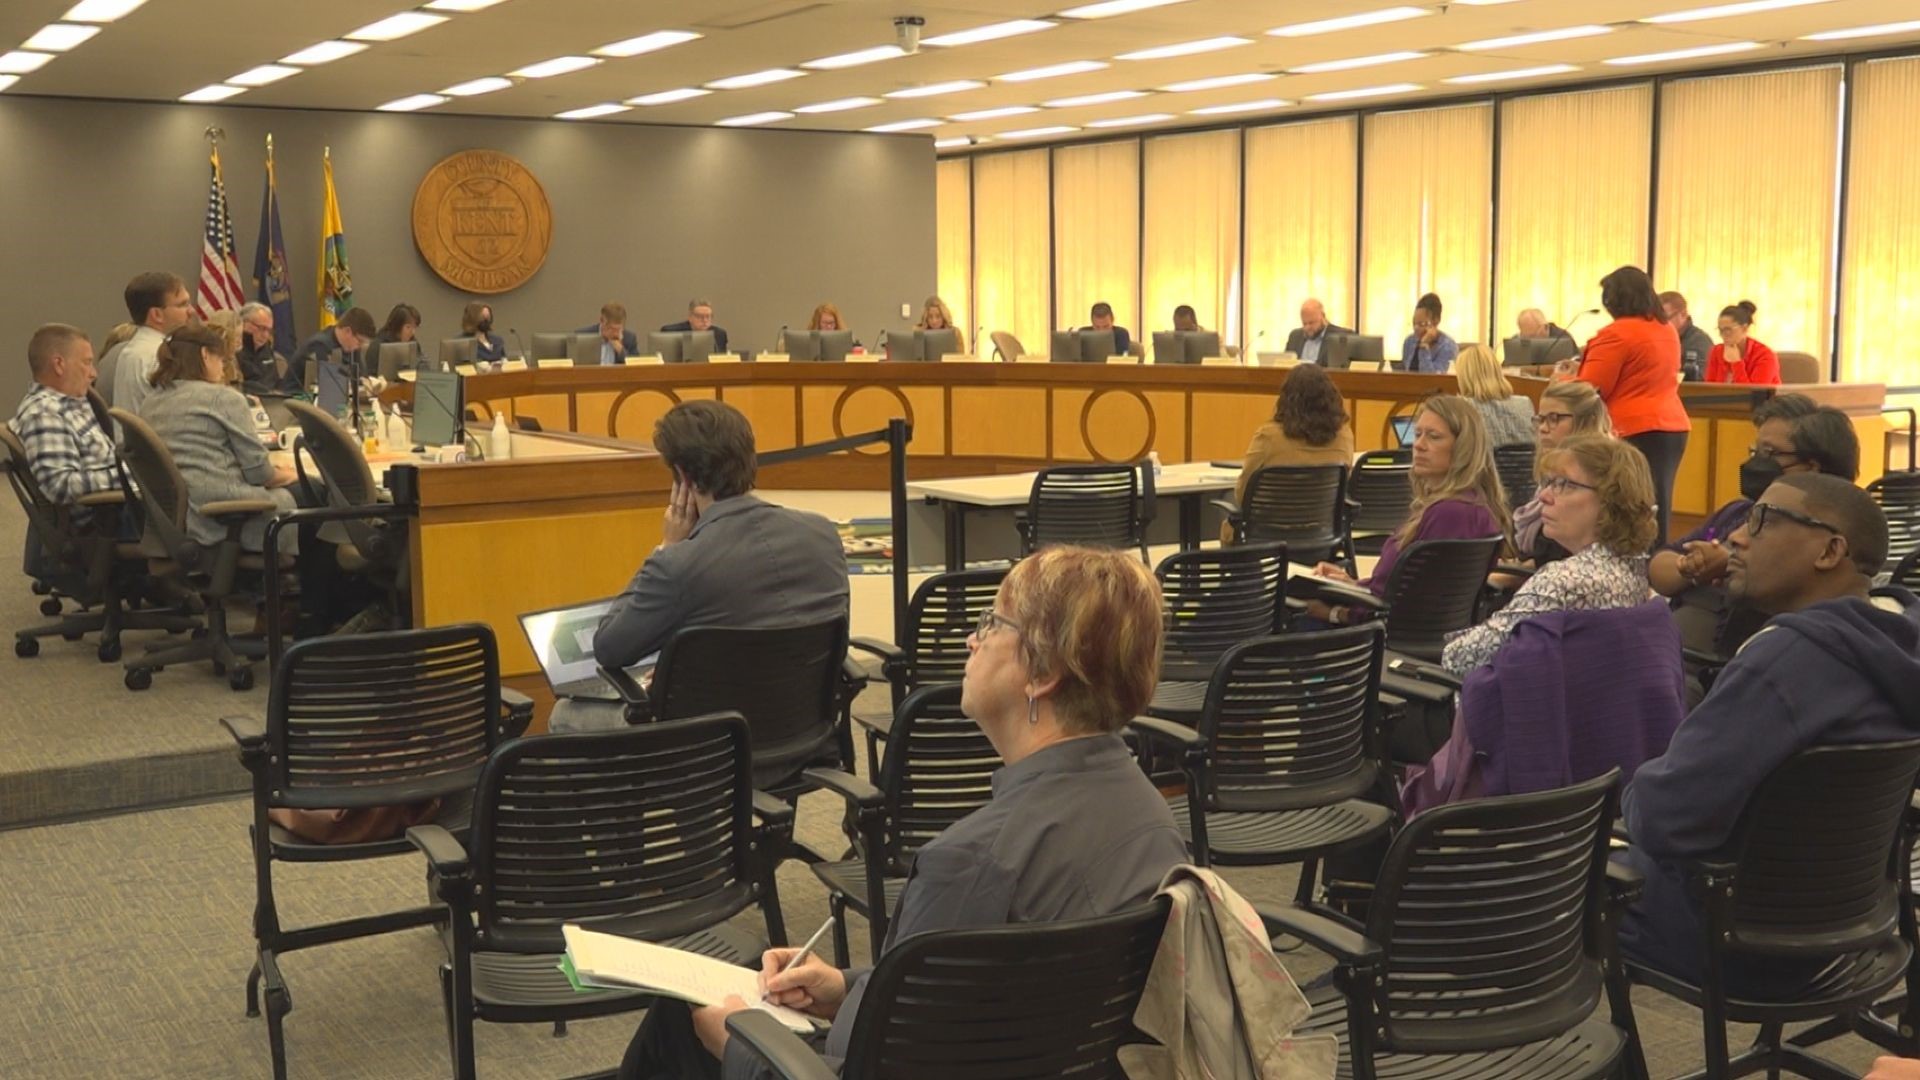 More than 300 different project proposals were voted on in a public meeting that's helping decide how more than $127 million in federal funding will be utilized.